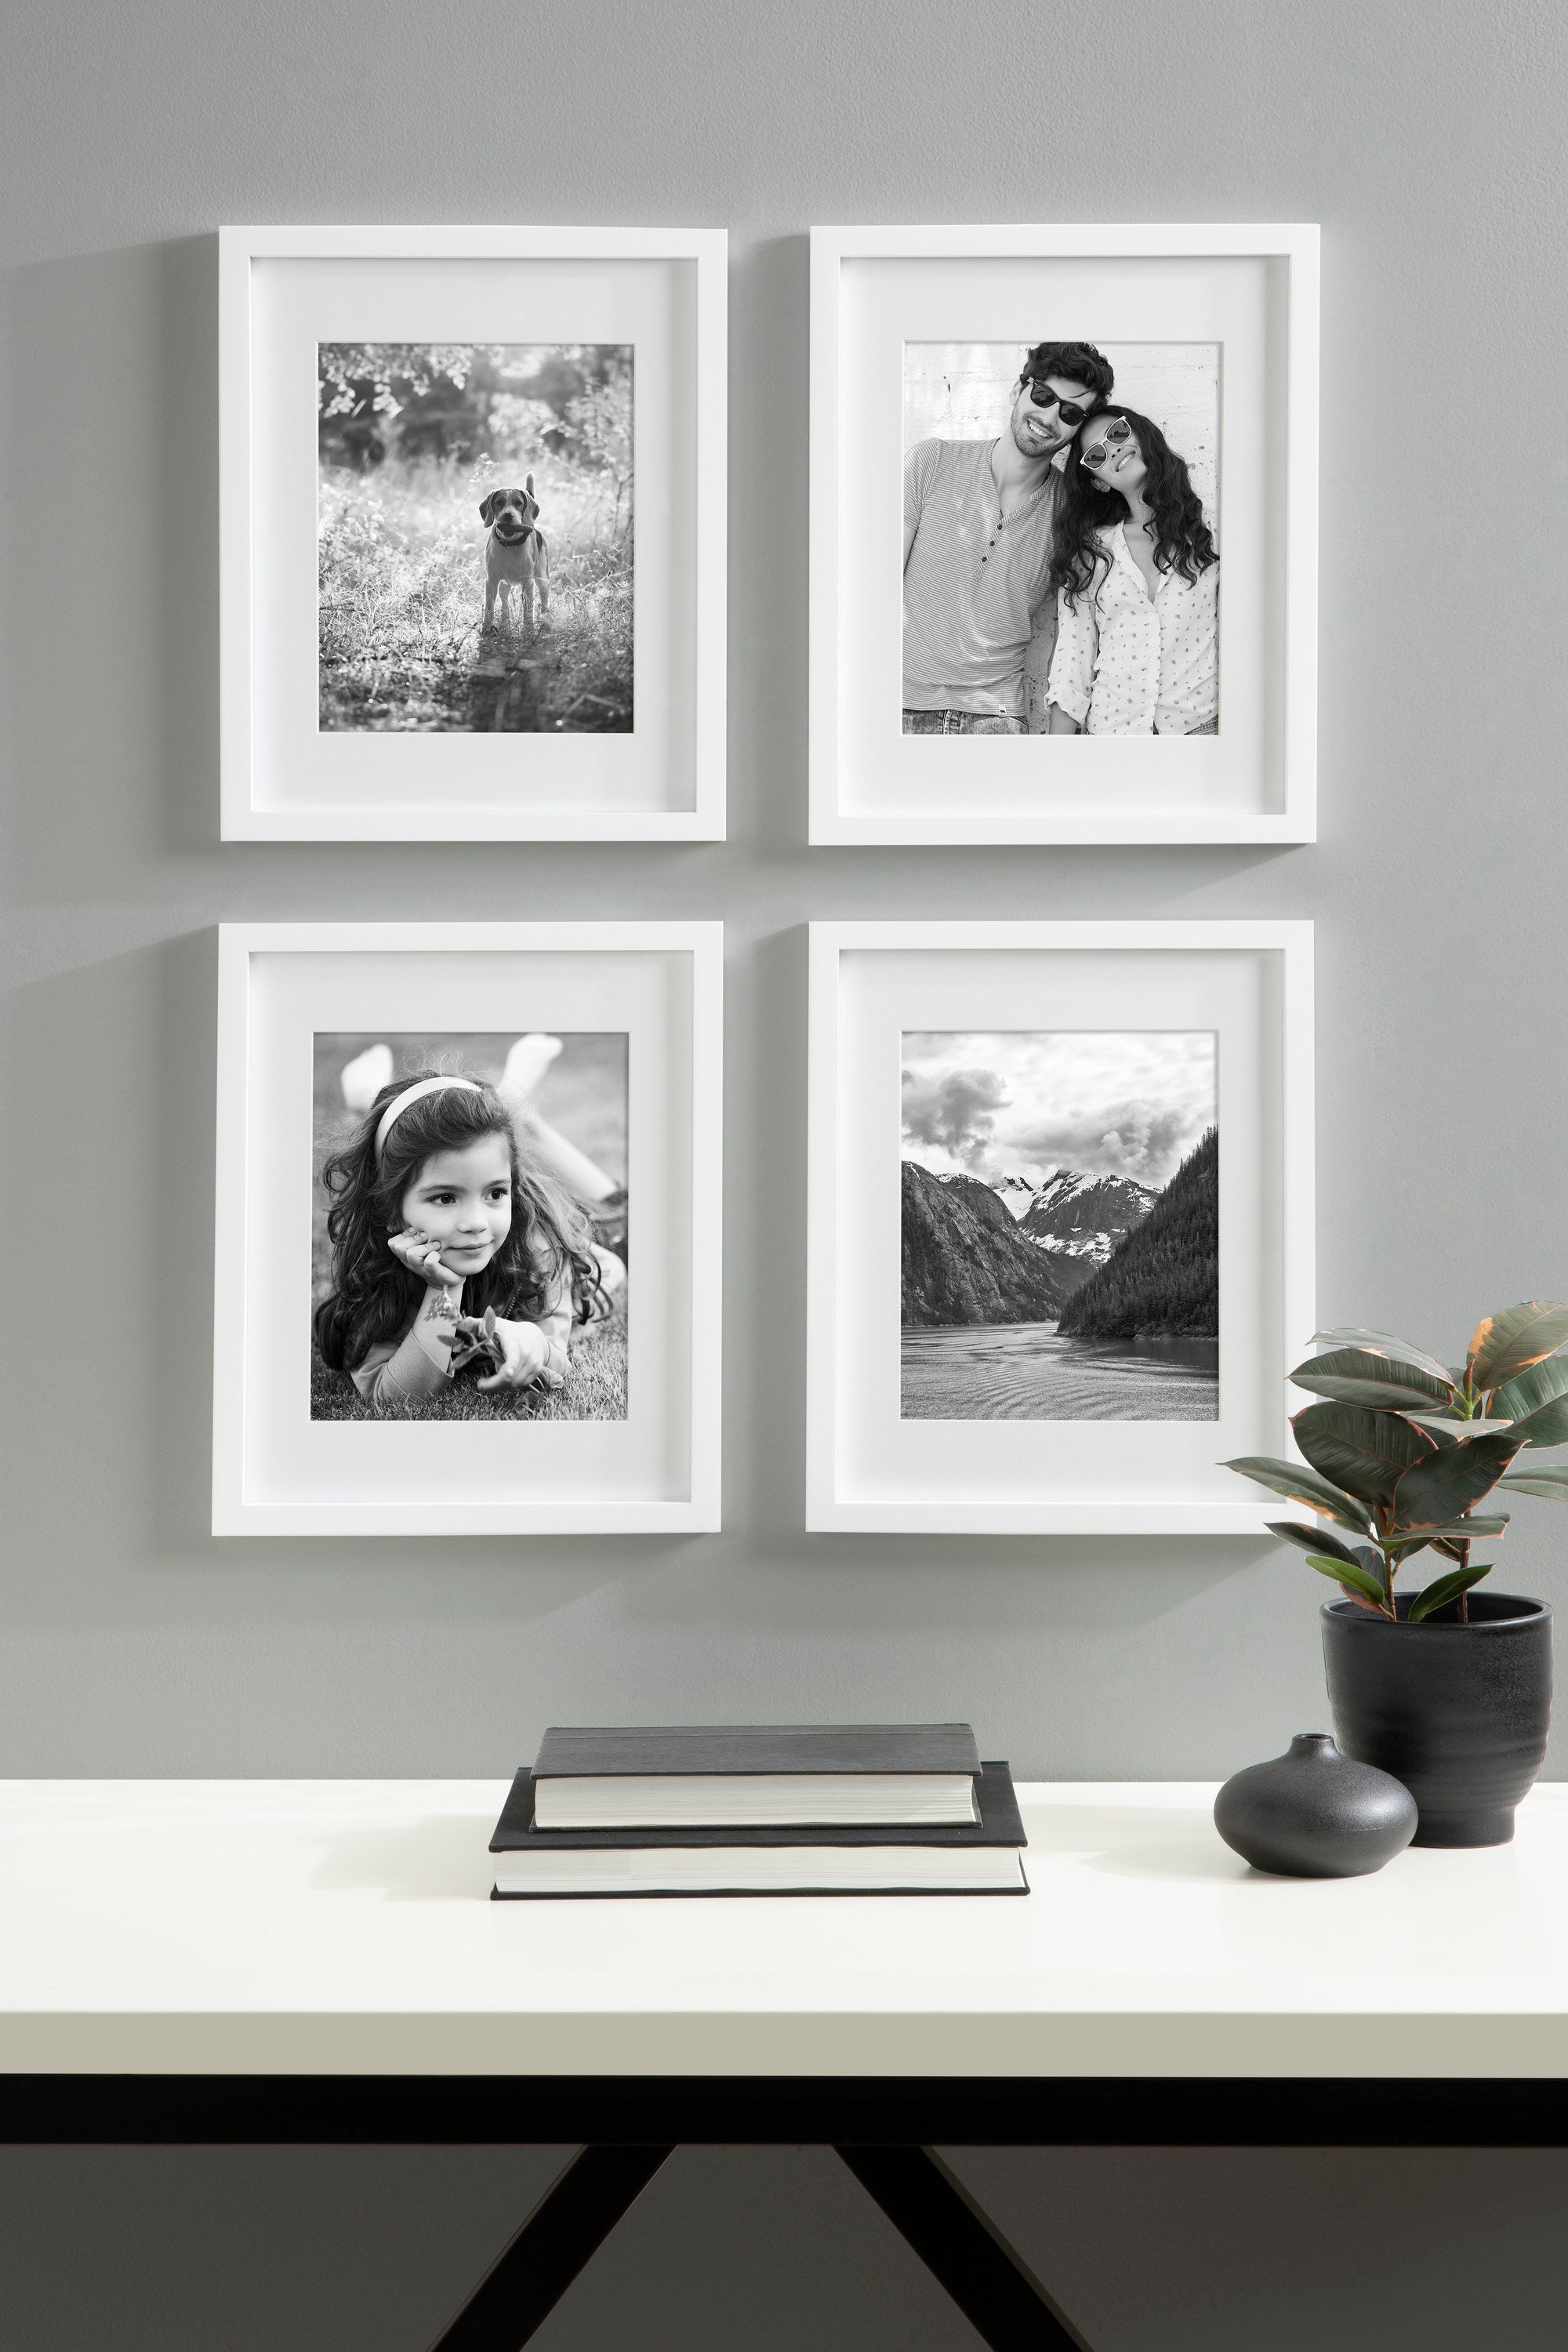 SEEDLING PHOTO FRAME 11x14 Picture Frame Set of 4, Display Pictures 8x10  with Mat or 11x14 Without mat,Wall Natural Wood Picture Frames  11x14(Natural